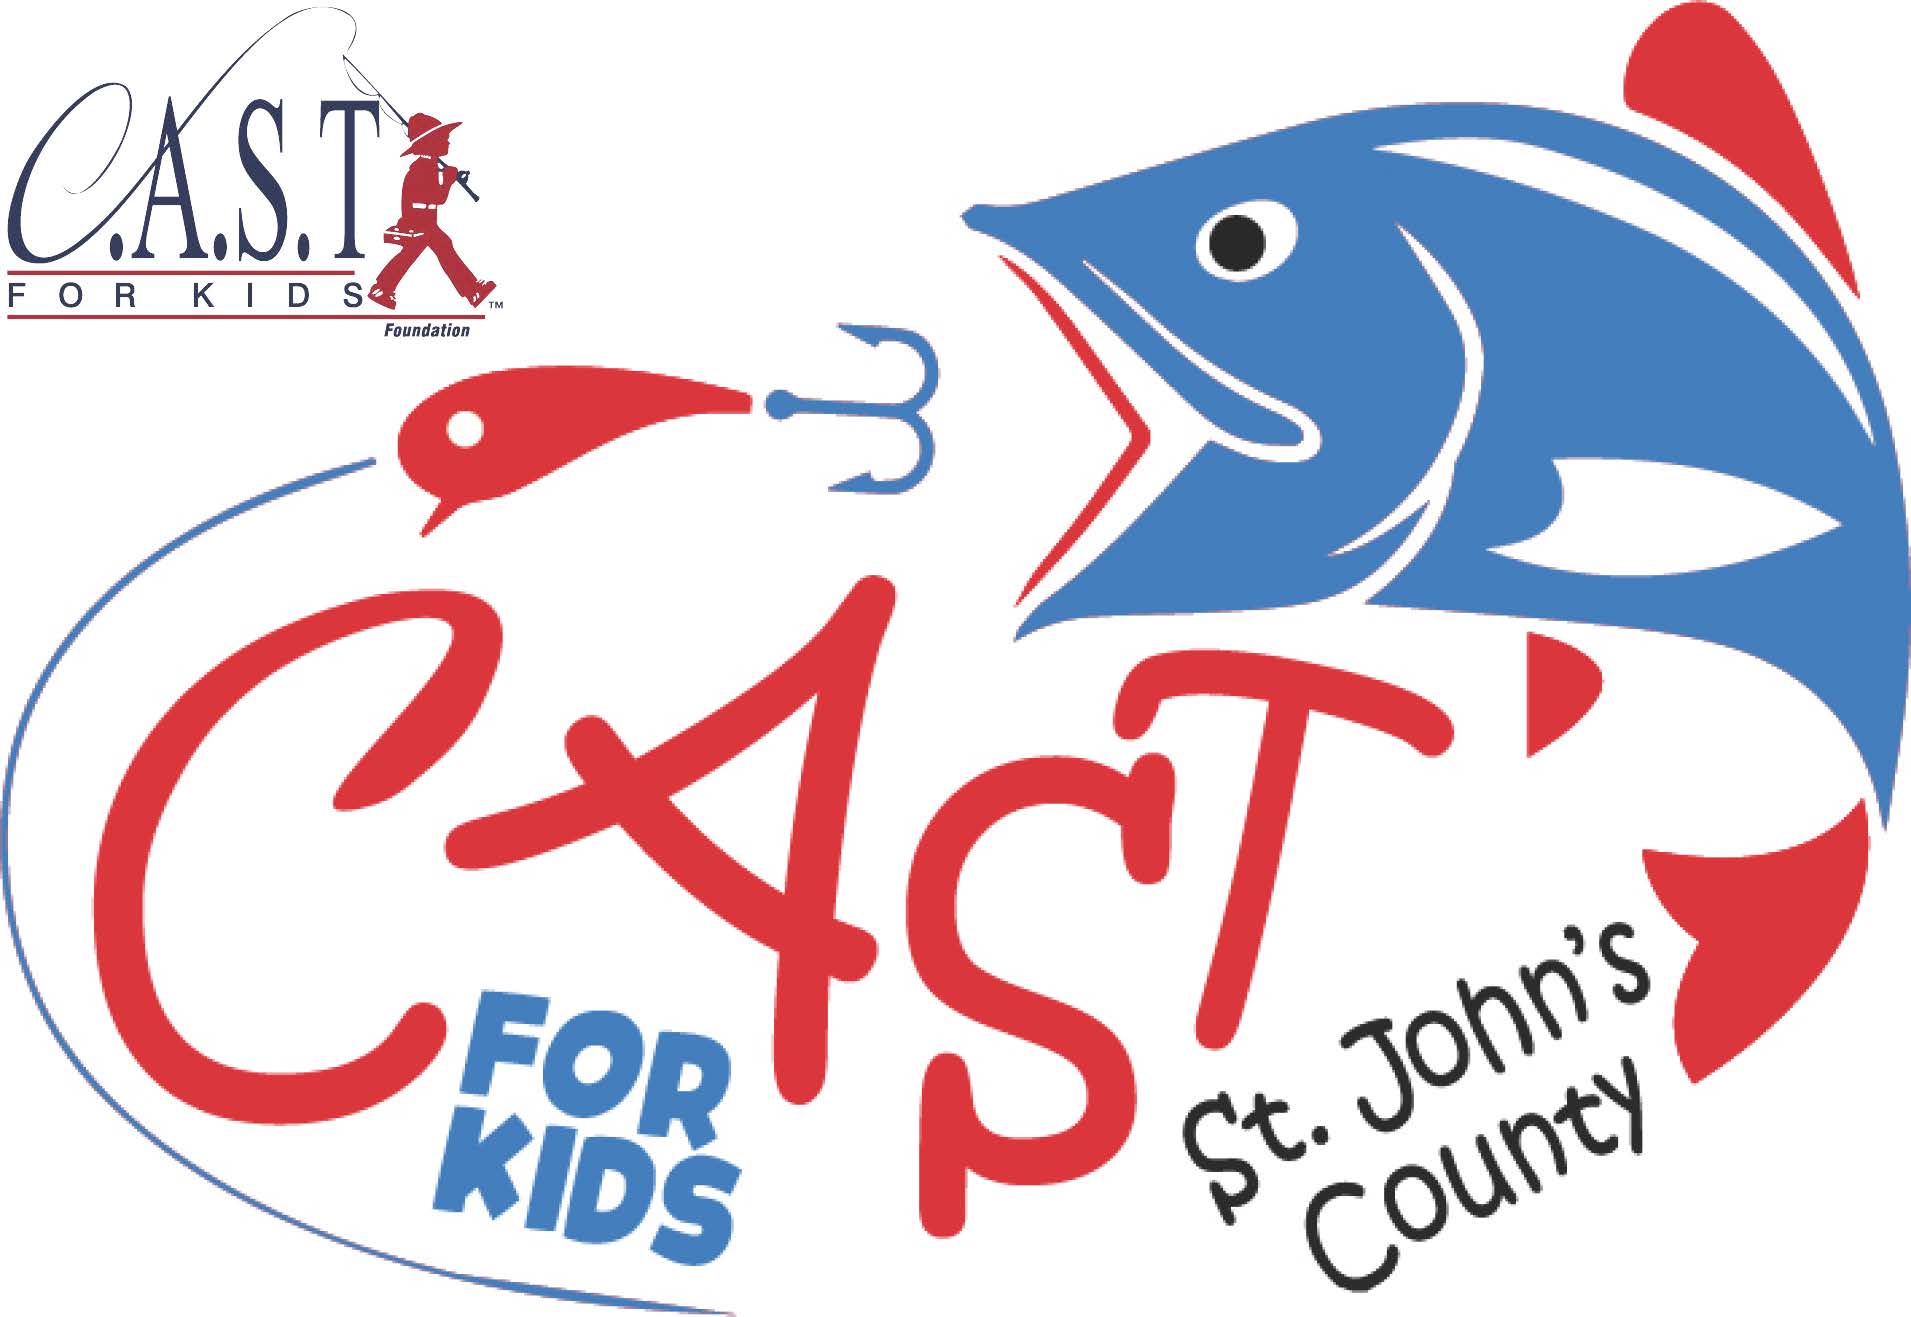 C.A.S.T. for Kids St. Johns County CAST for Kids Foundation